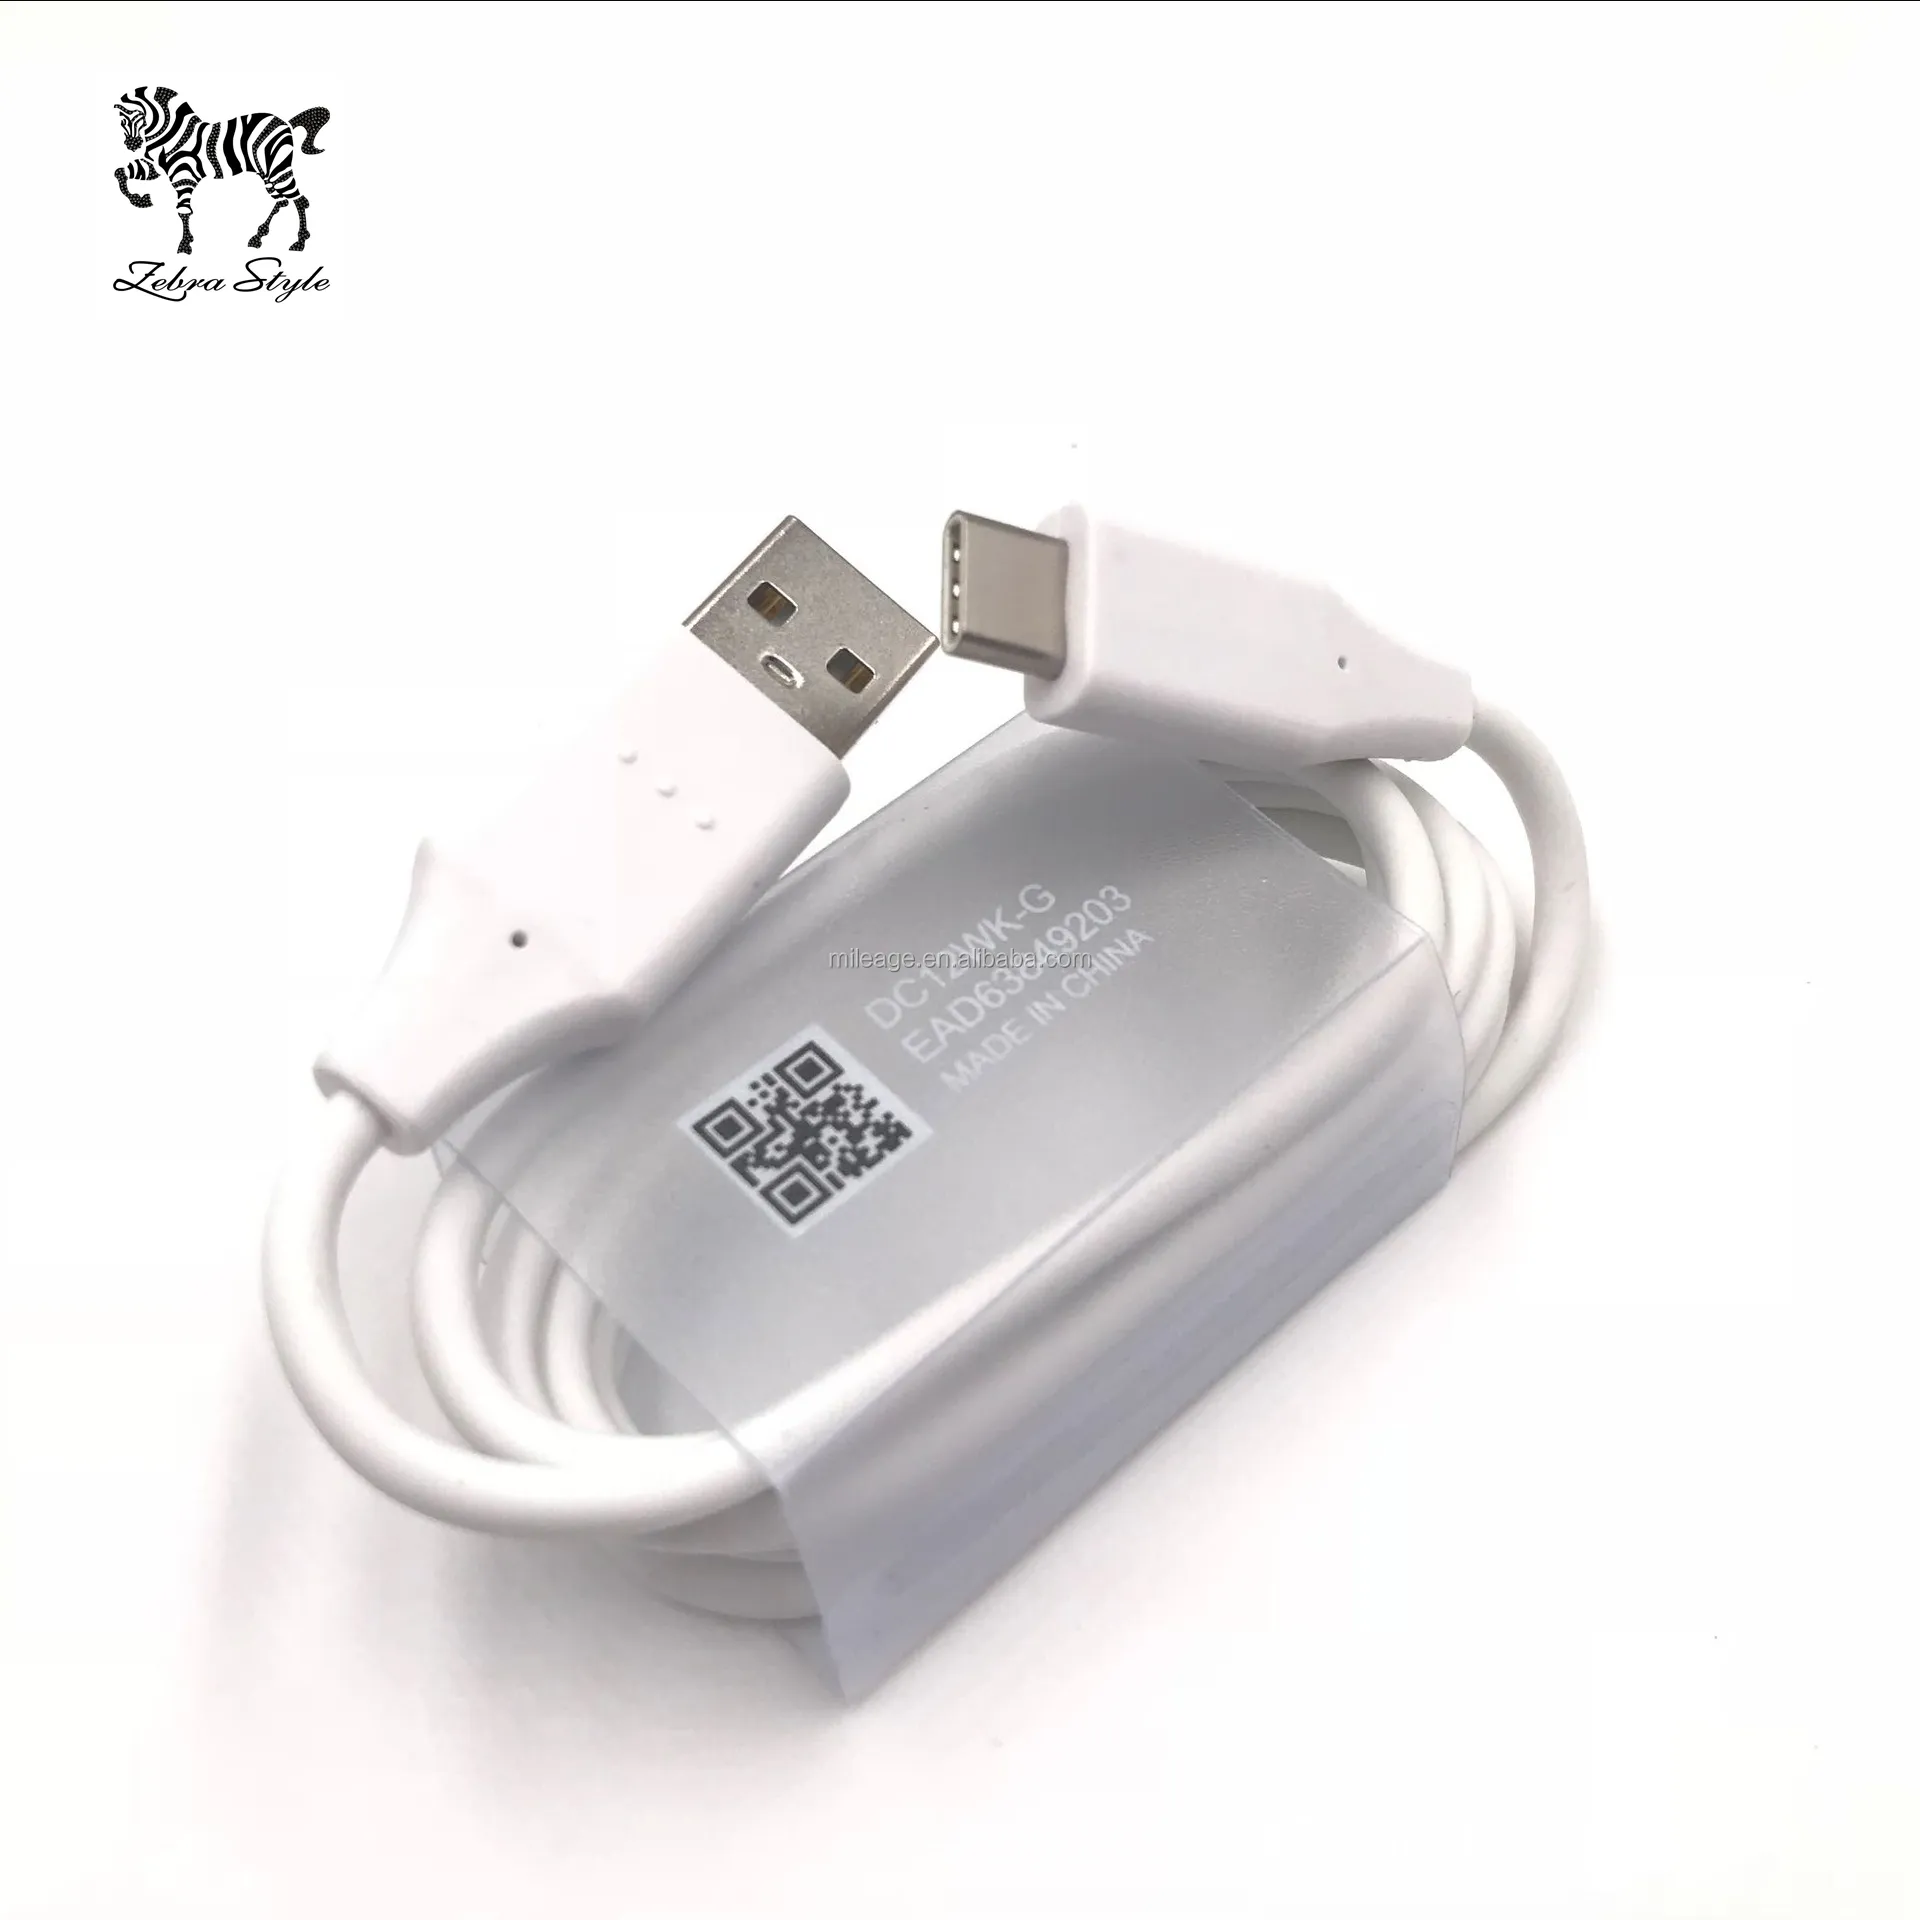 Original data line transfer TYPE C usb charging cable type c charger data cable for LG G5 usb c cable